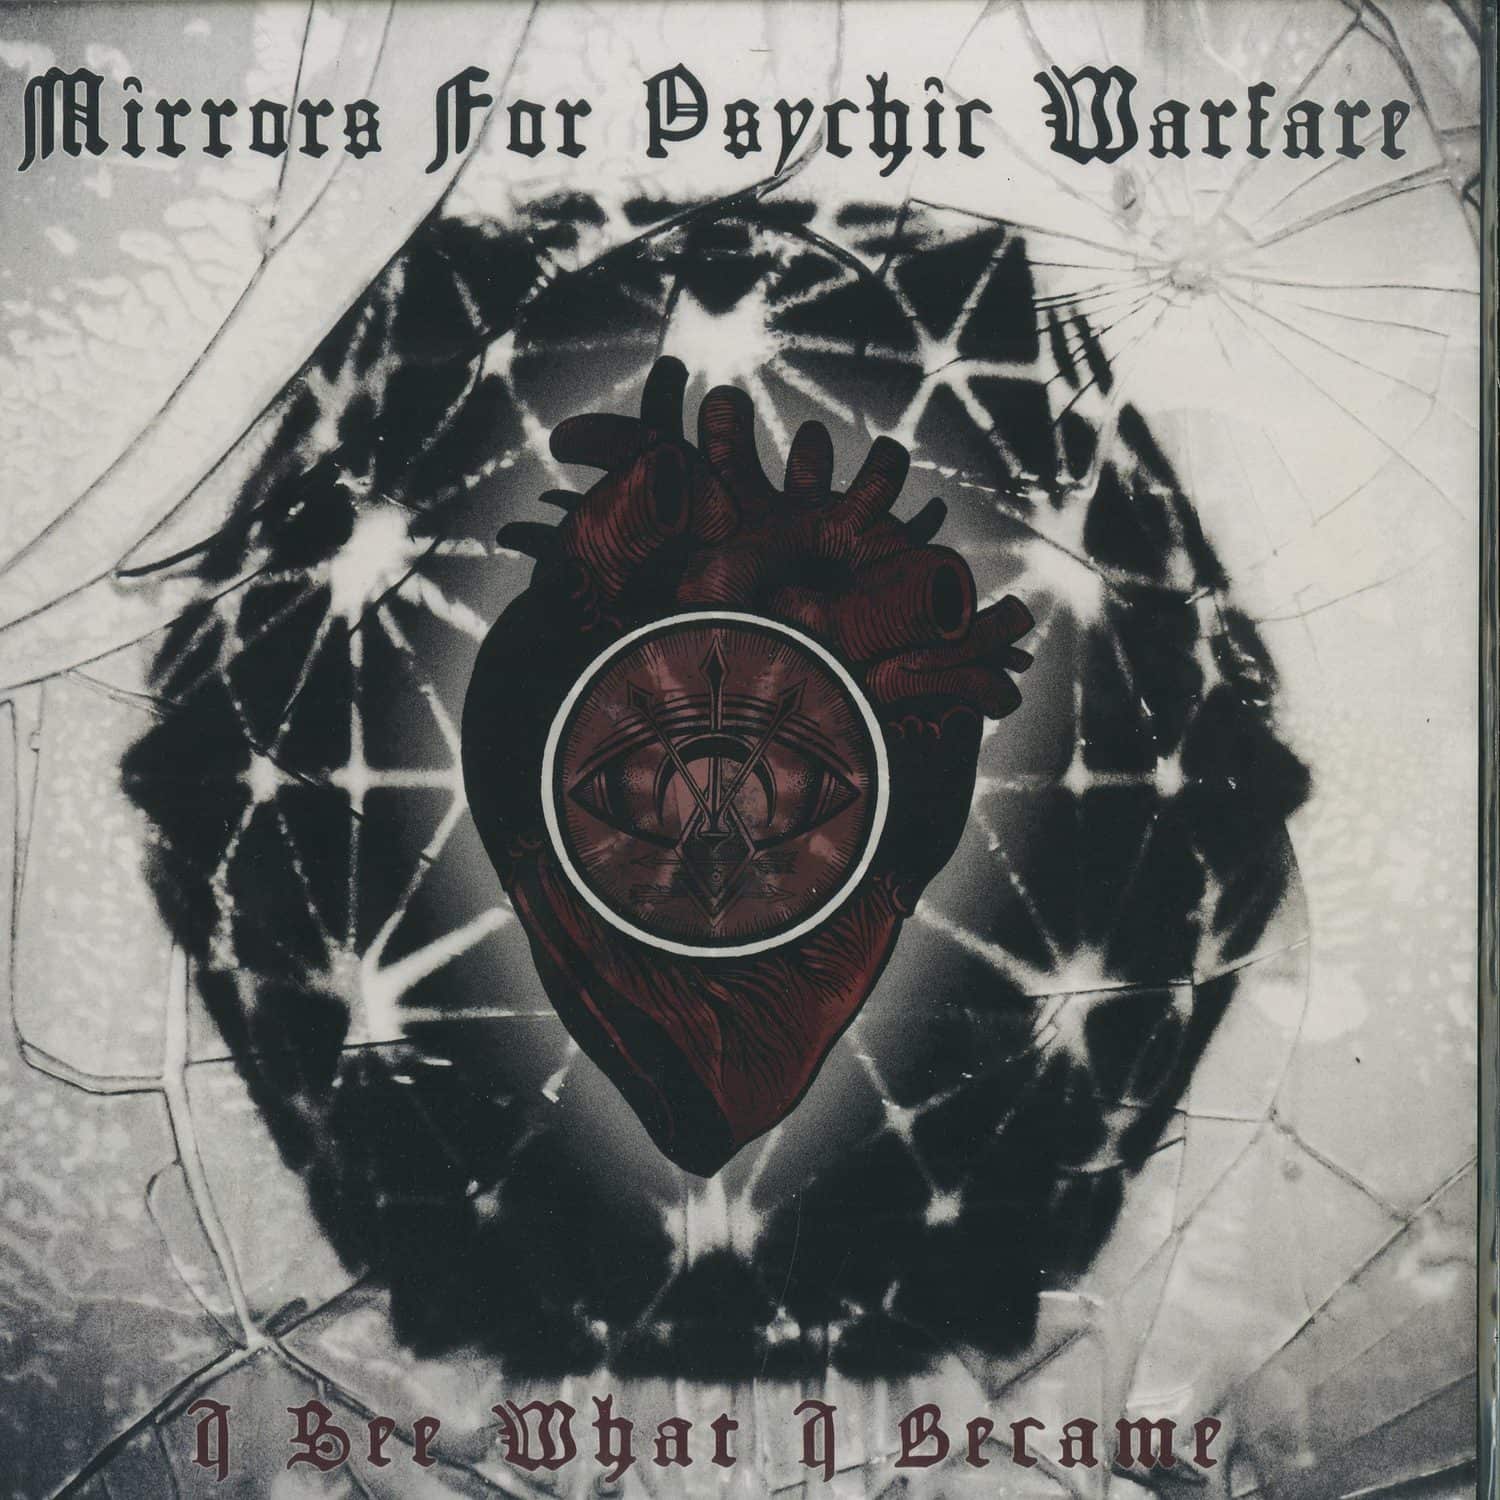 Mirrors For Psychic Warfare - I SEE WHAT I BECAME 